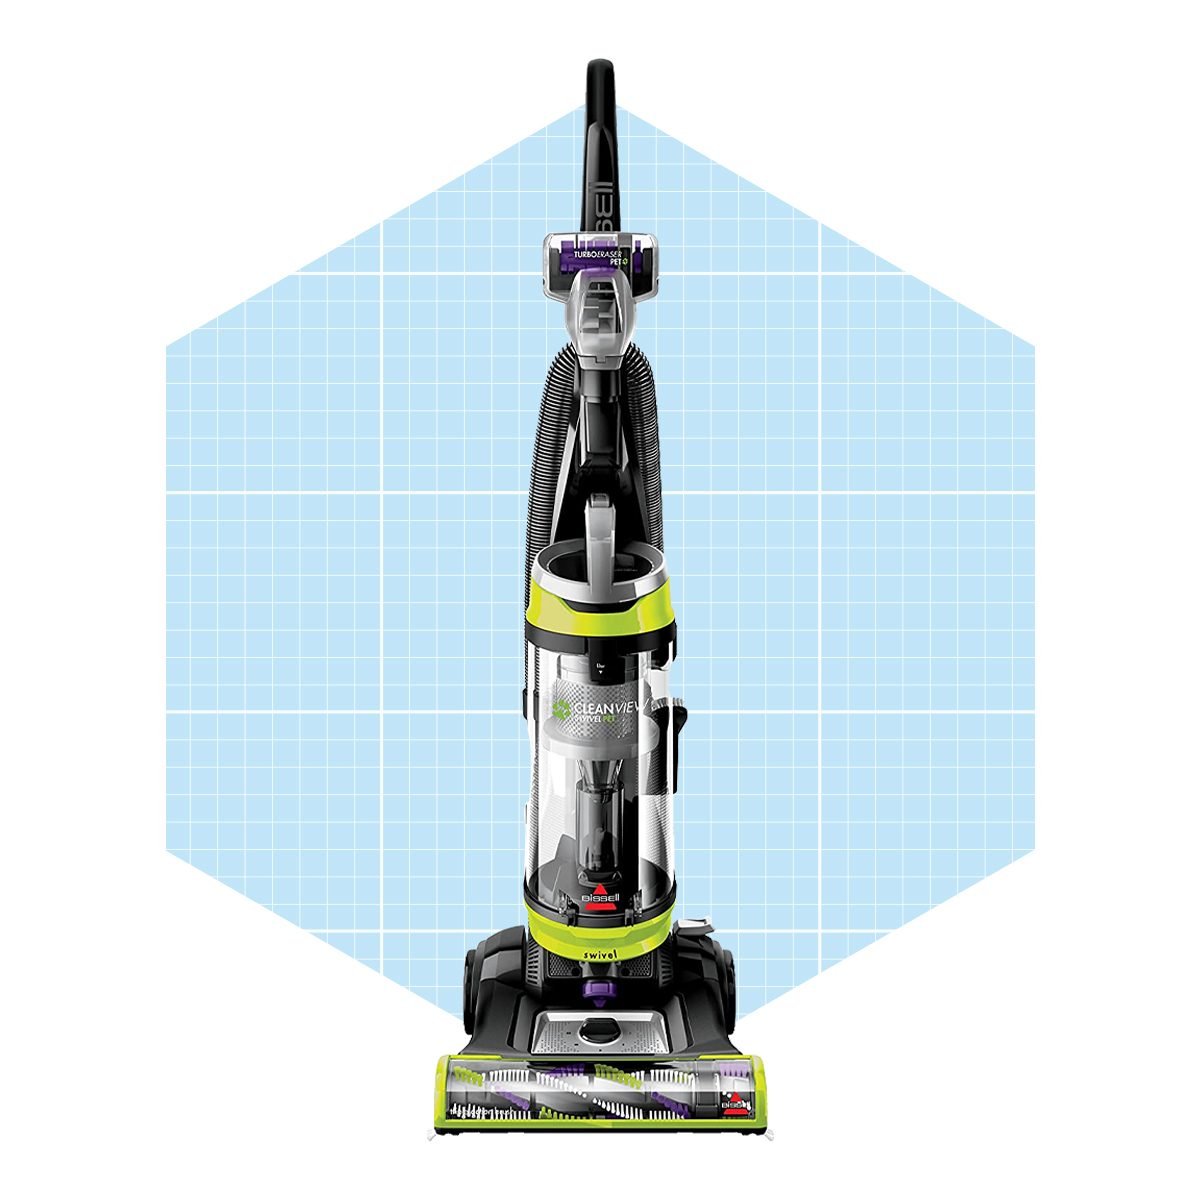 Bissell Cleanview Swivel Upright Bagless Vacuum With Swivel Steering Ecomm Amazon.com